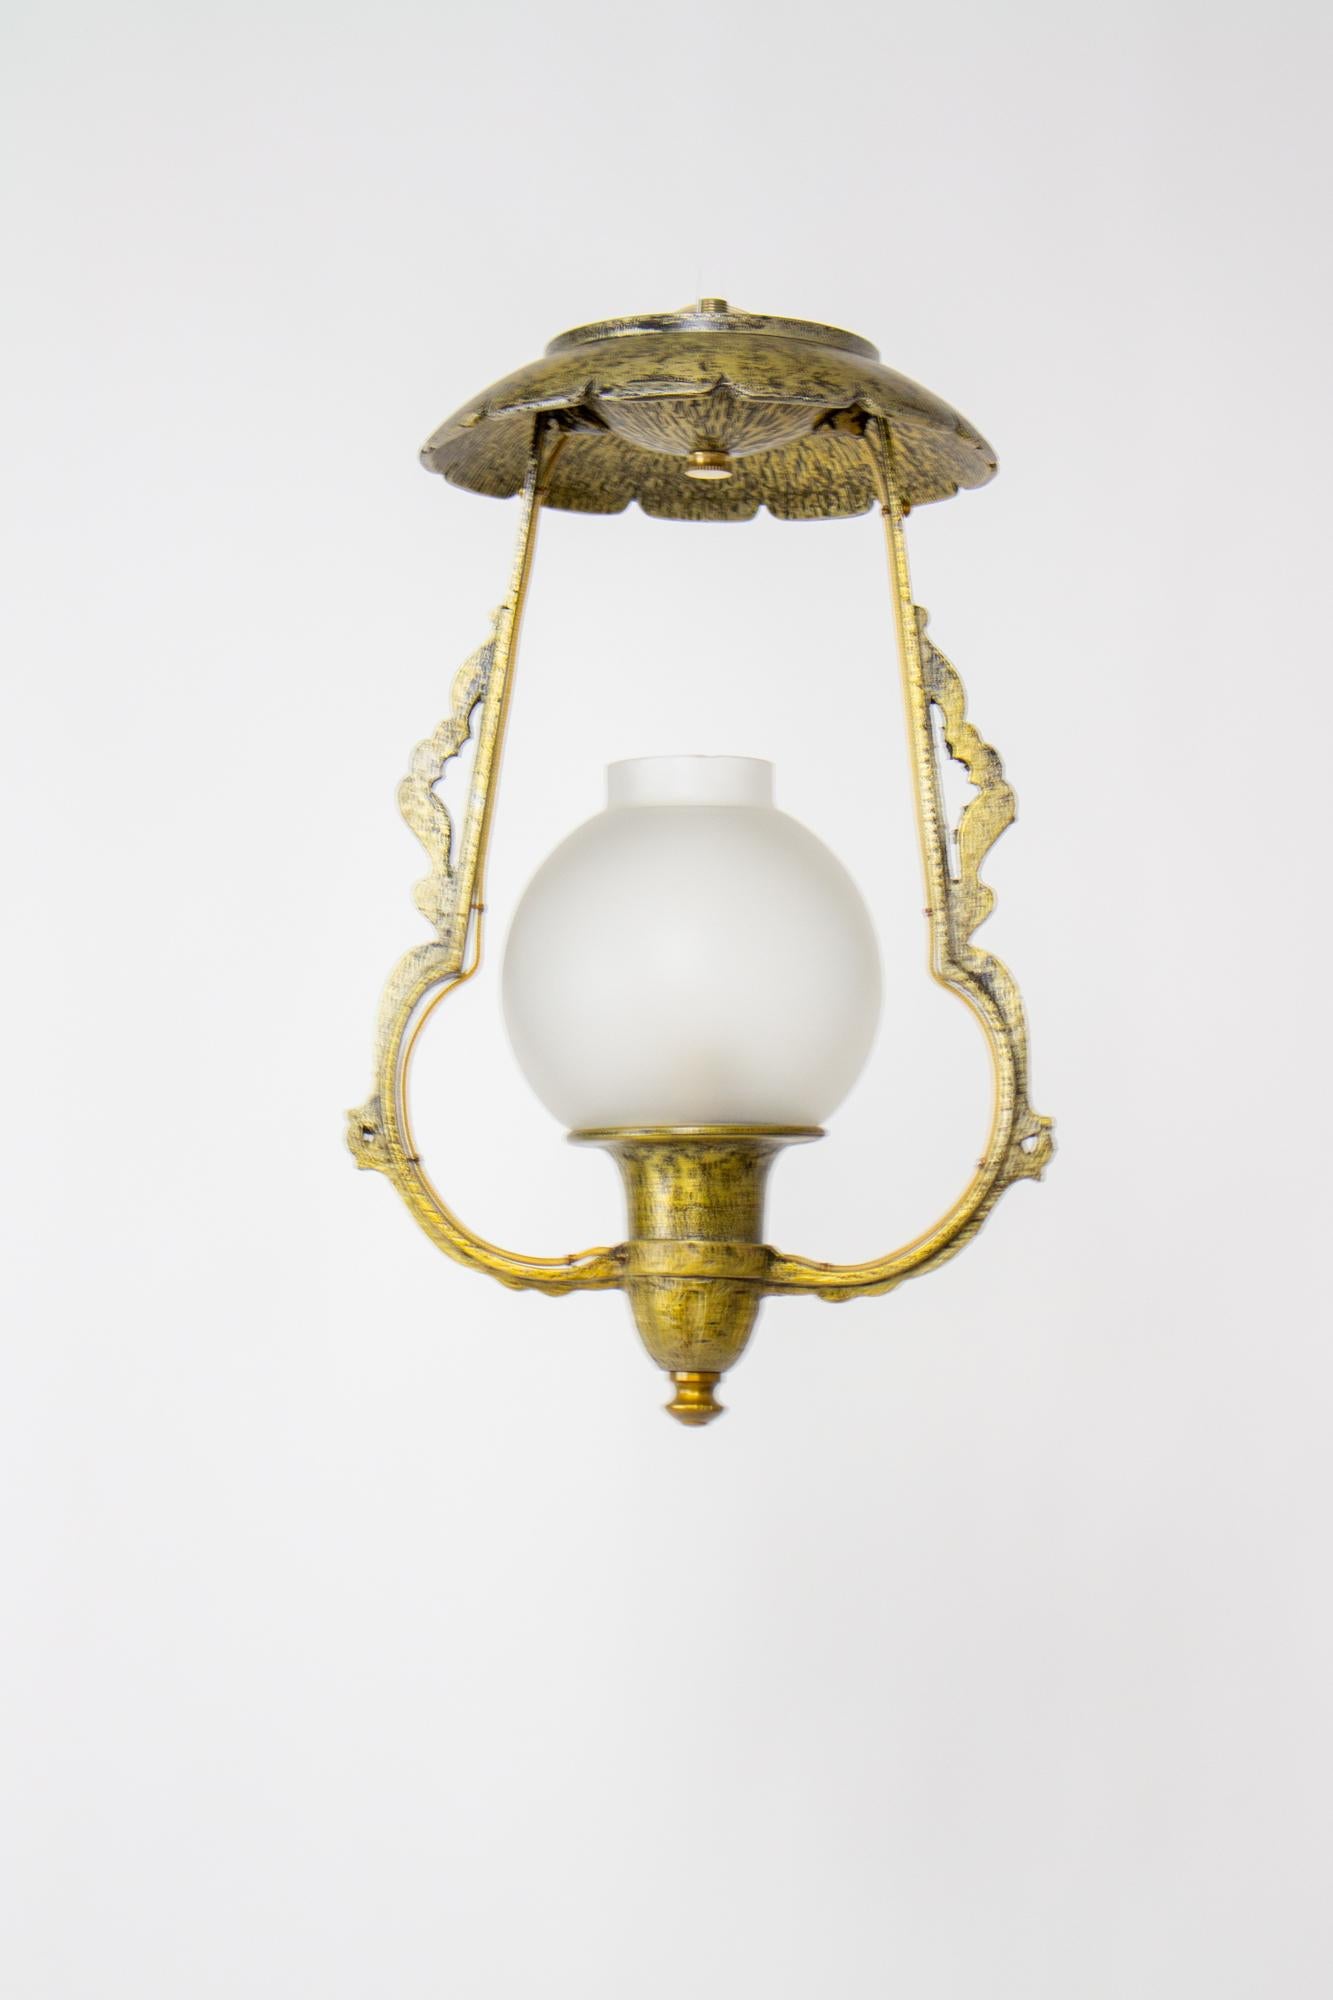 Small hall light, tudor or storybook style. Hammered metal look in cast aluminum. Brass finish. Unusual rounded globe. The lantern mounts flush to the ceiling so it is excellent for a small space and low ceilings, as low as eight feet. Completely